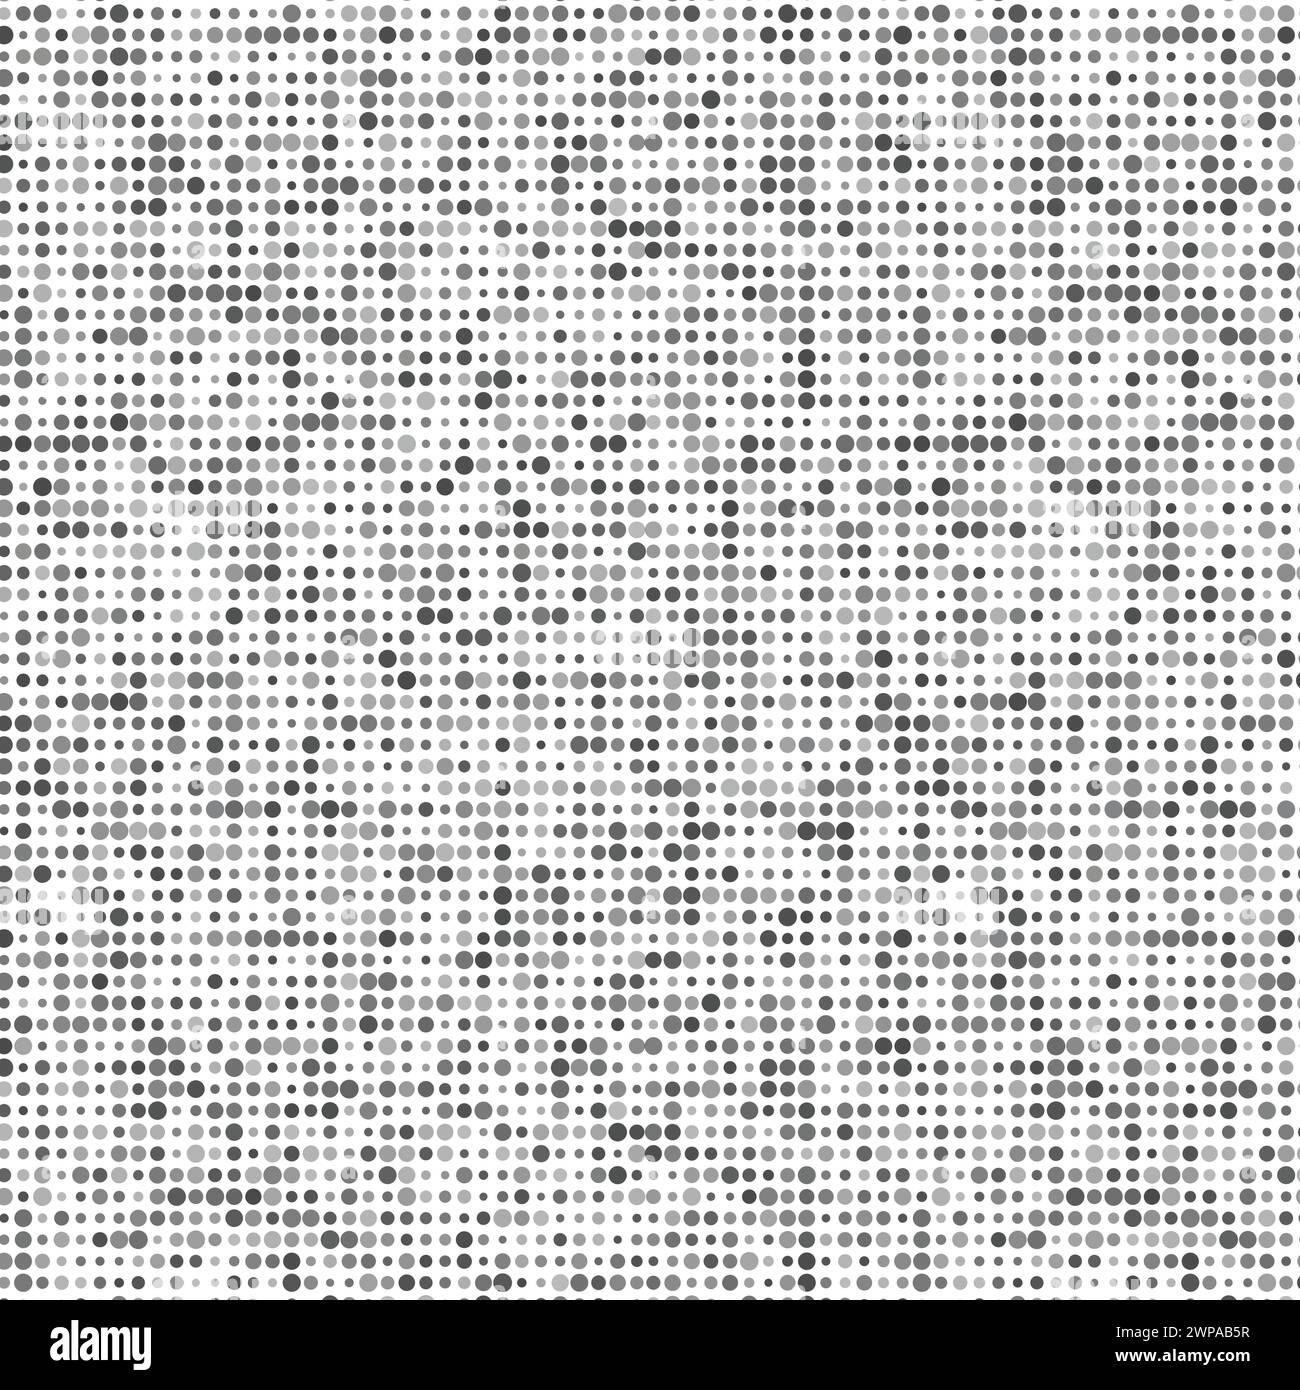 Grunge halftone vector background. Halftone dots vector texture. Abstract wave halftone black and white. Monochrome texture for printing on badges, po Stock Vector